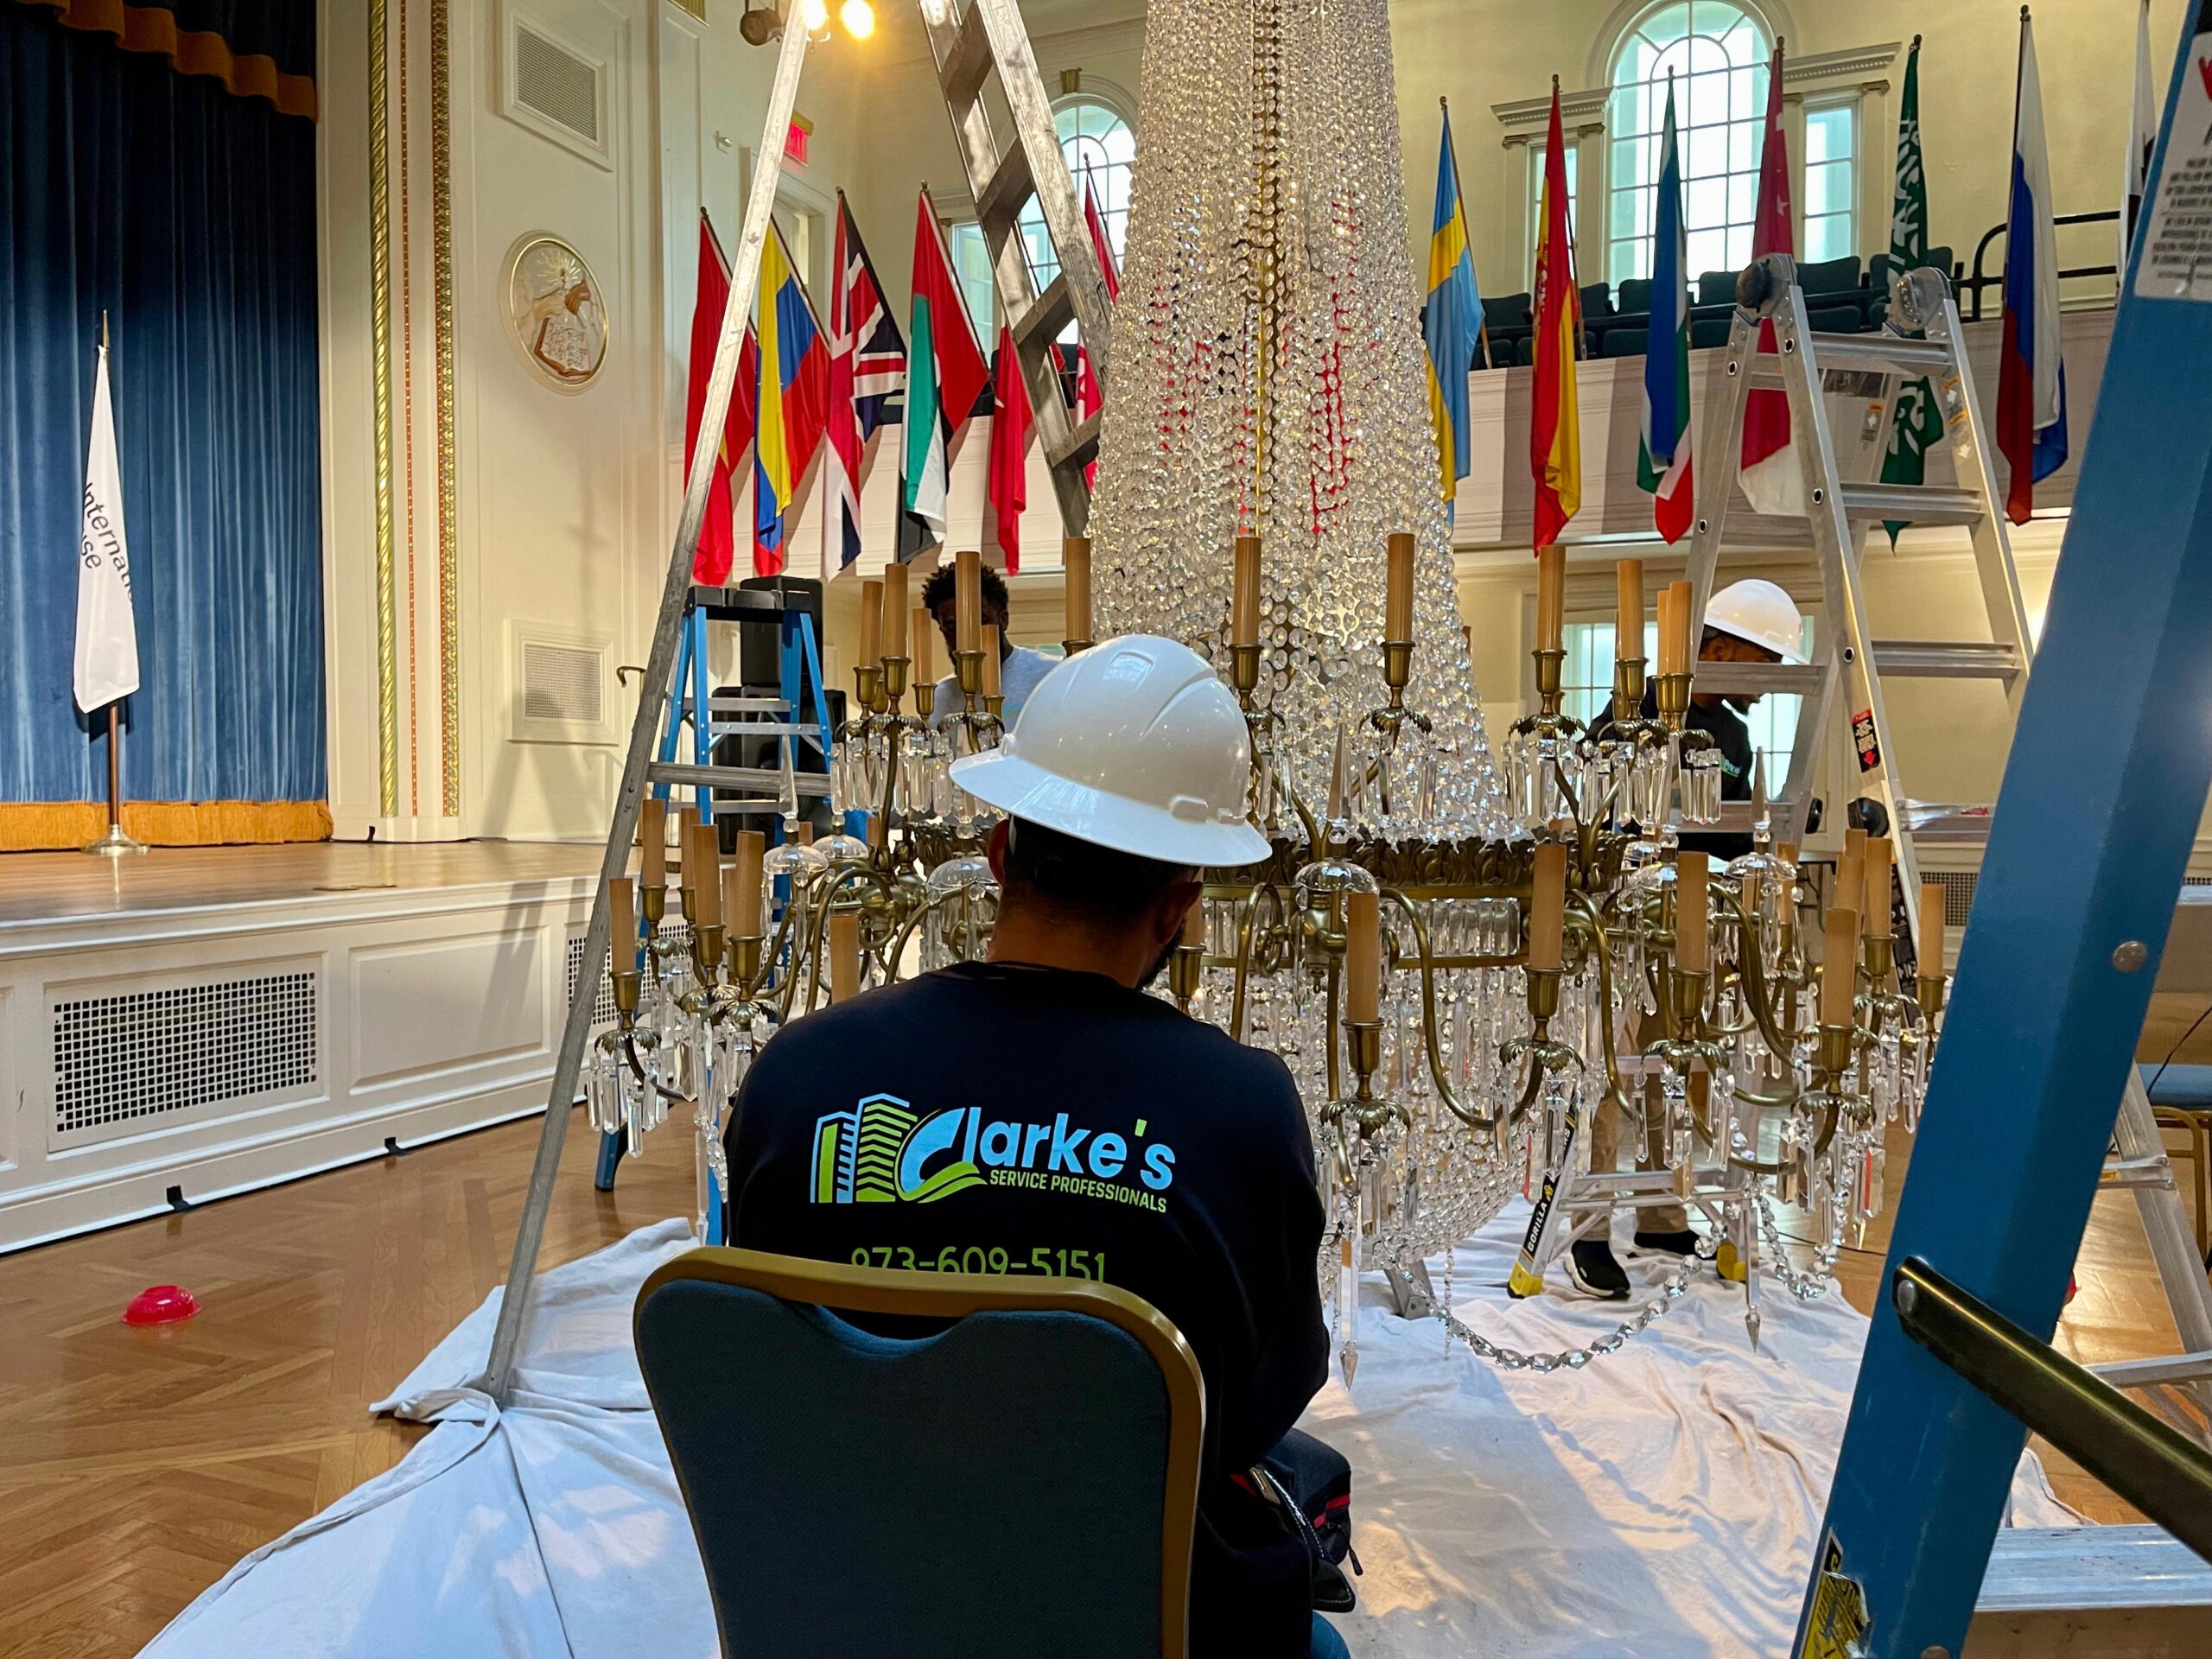 Clarke's Service Professionals Man in a hard hat carefully cleaning a large chandelier while seated